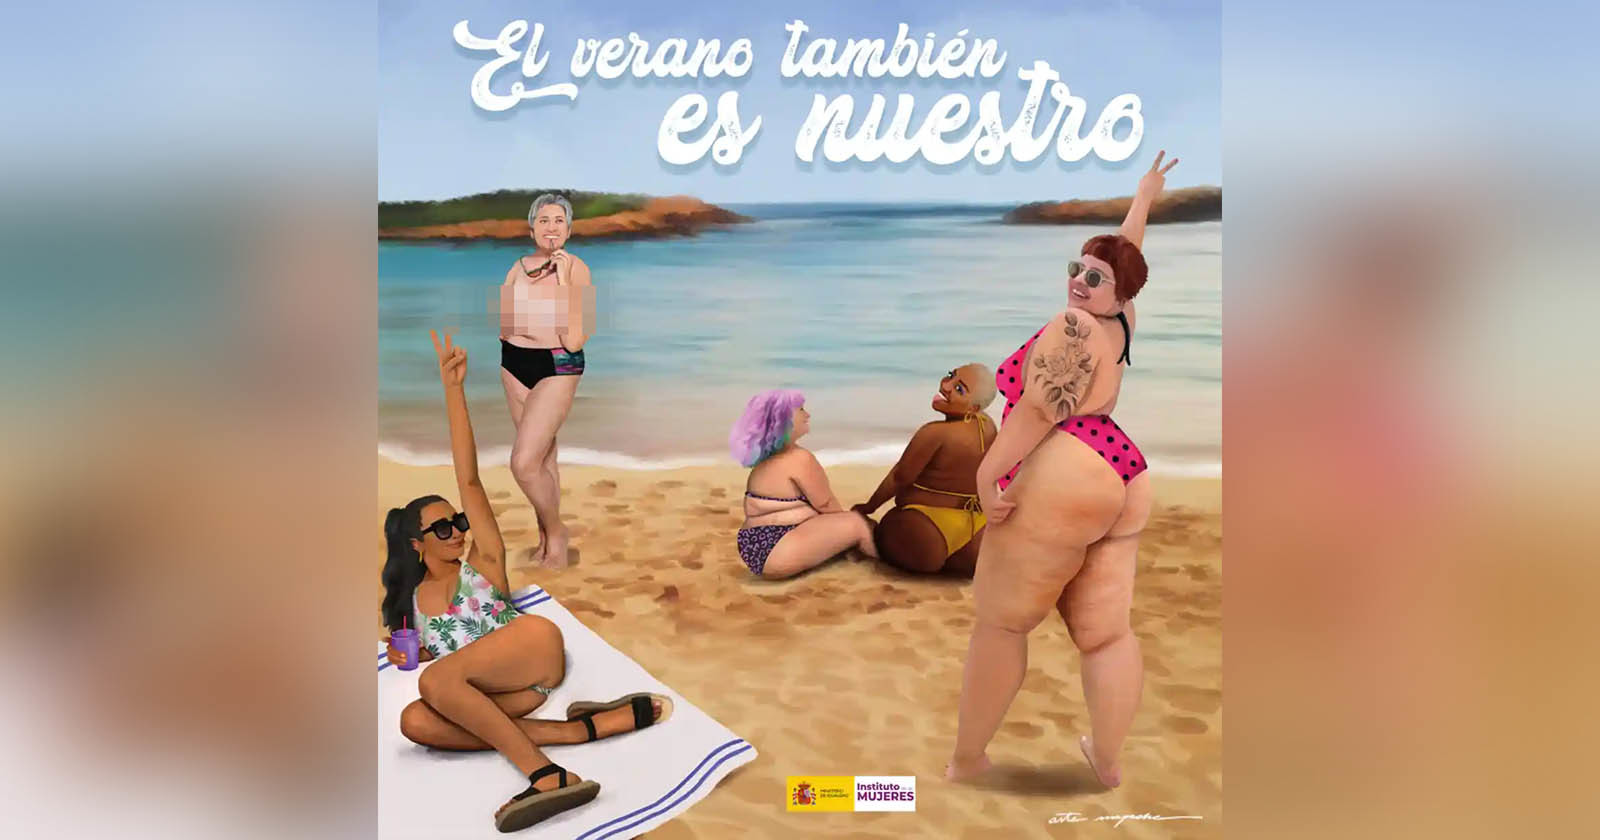 Women Left Shaking After Their Photos Used in Ad Without Permission